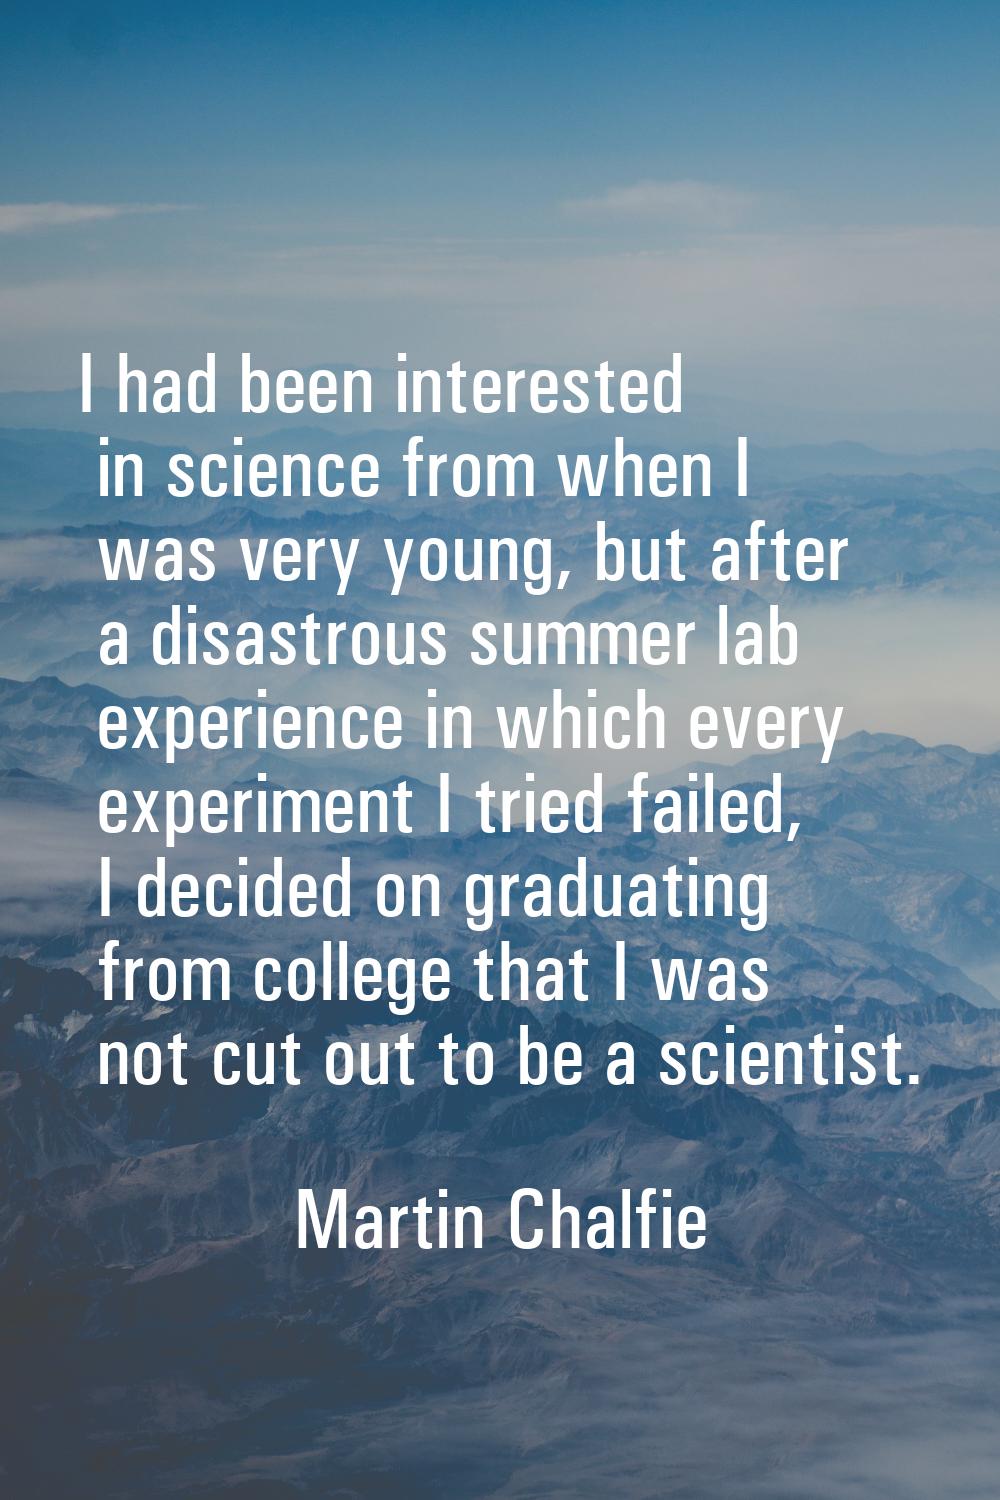 I had been interested in science from when I was very young, but after a disastrous summer lab expe